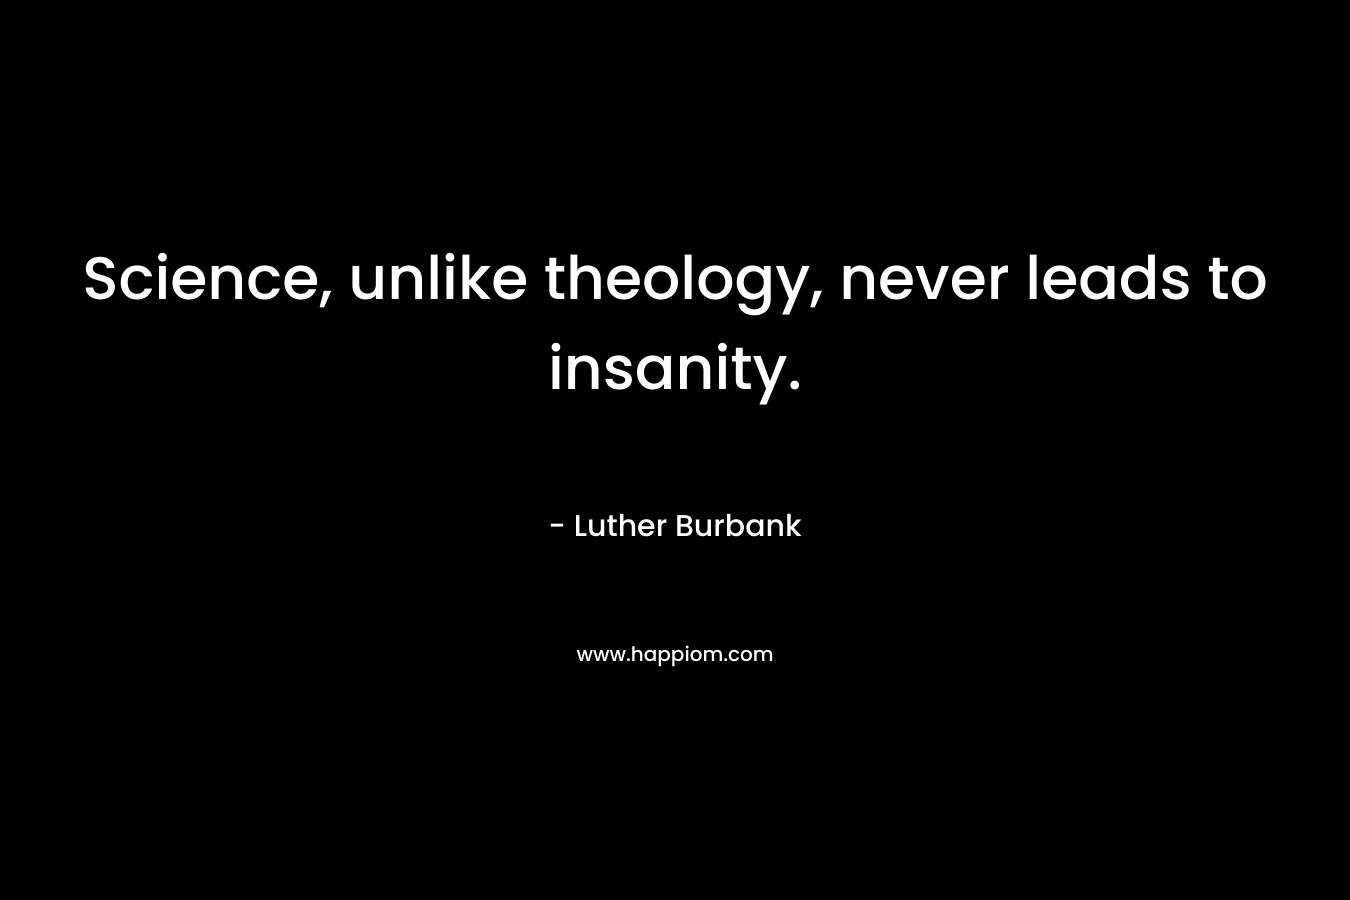 Science, unlike theology, never leads to insanity. – Luther Burbank